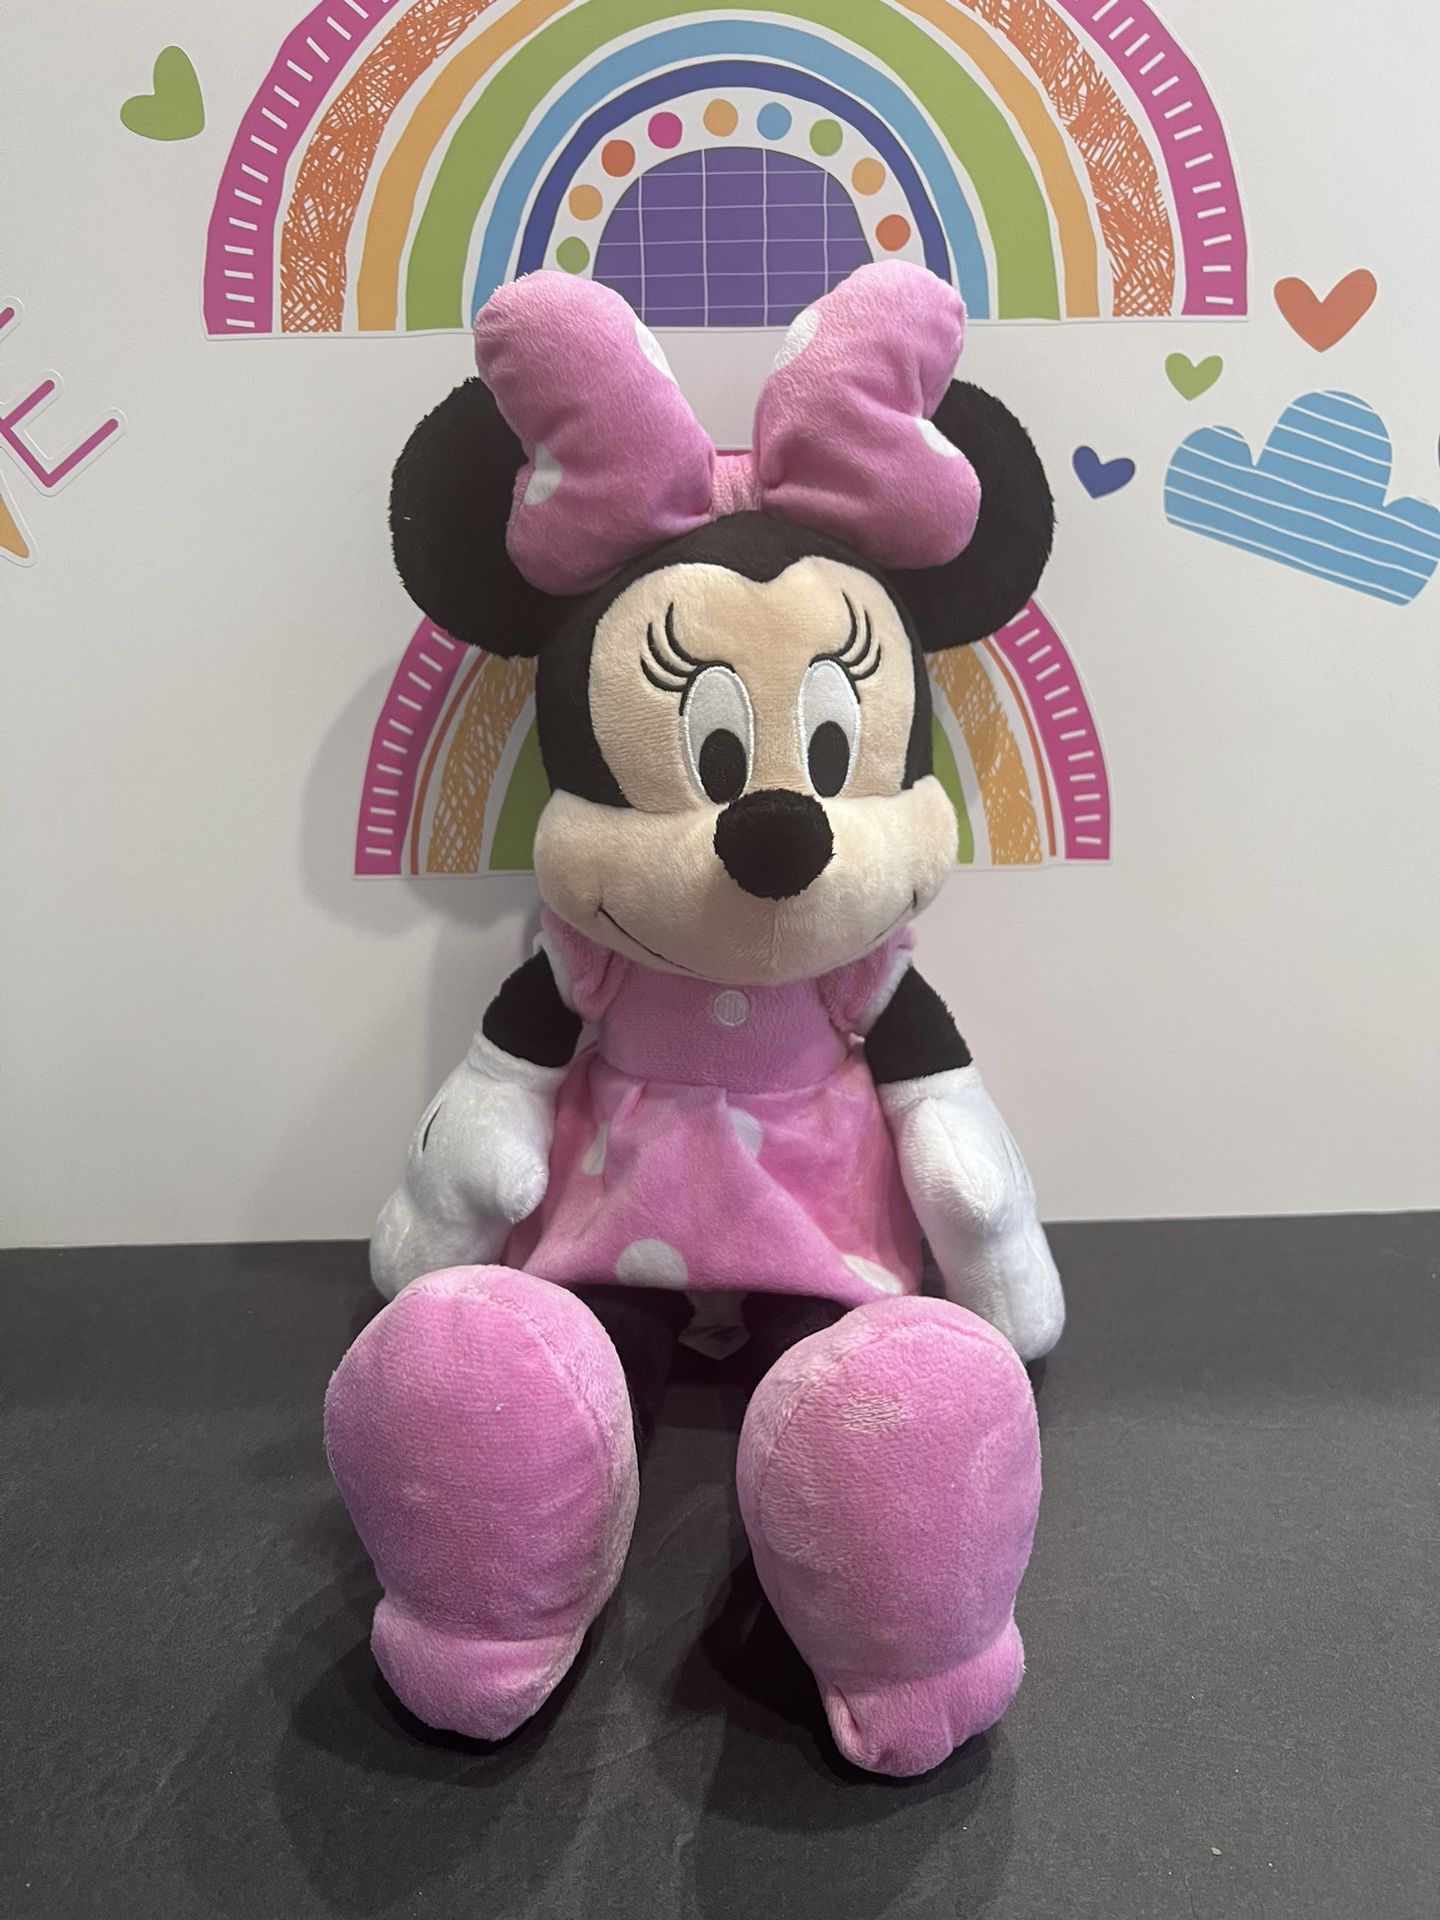 DISNEY MINNIE MOUSE 15 INCH SOFT PLUSH!  New No Store Tag